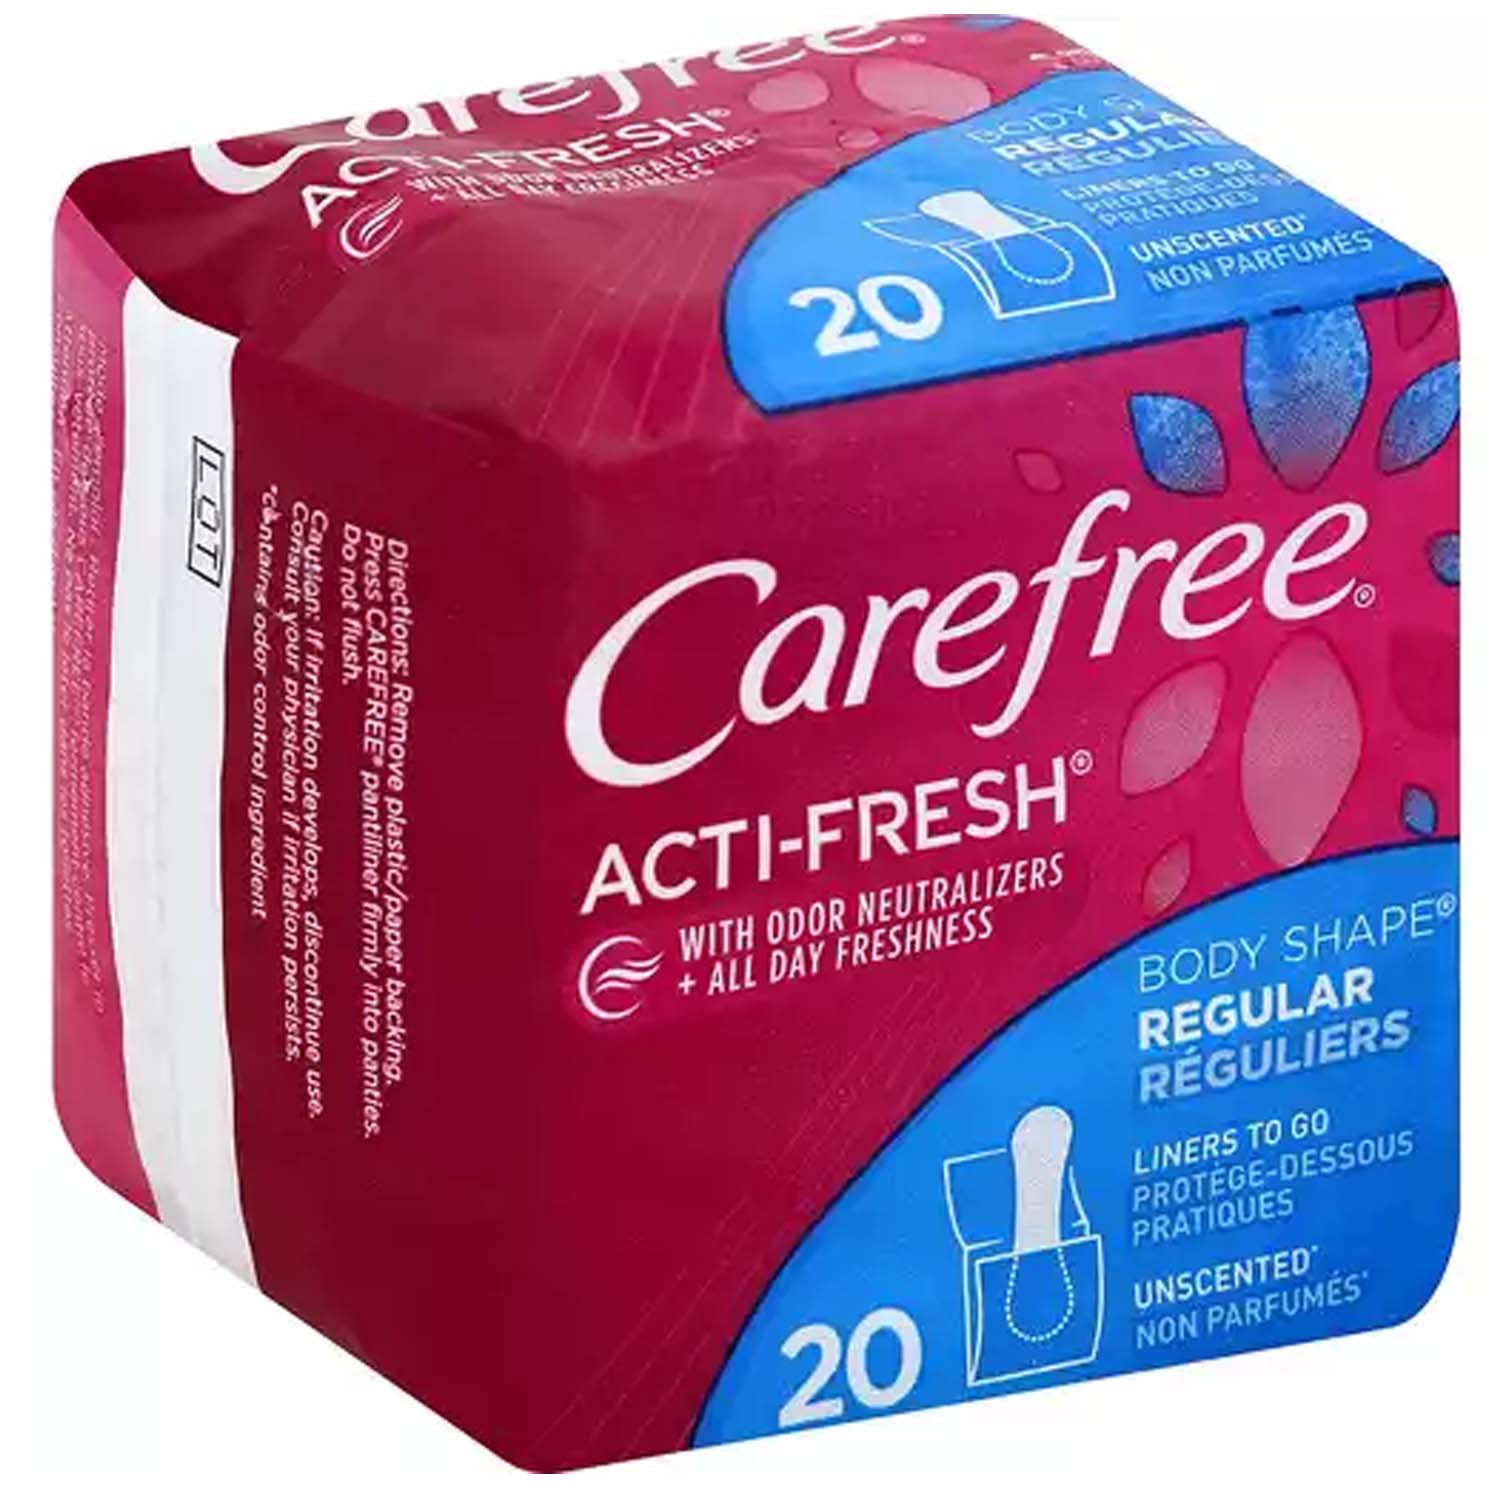 Carefree Acti-Fresh Body Shape Panty Liners Regular Pack of 120 Liners, 120  Panty Liners 